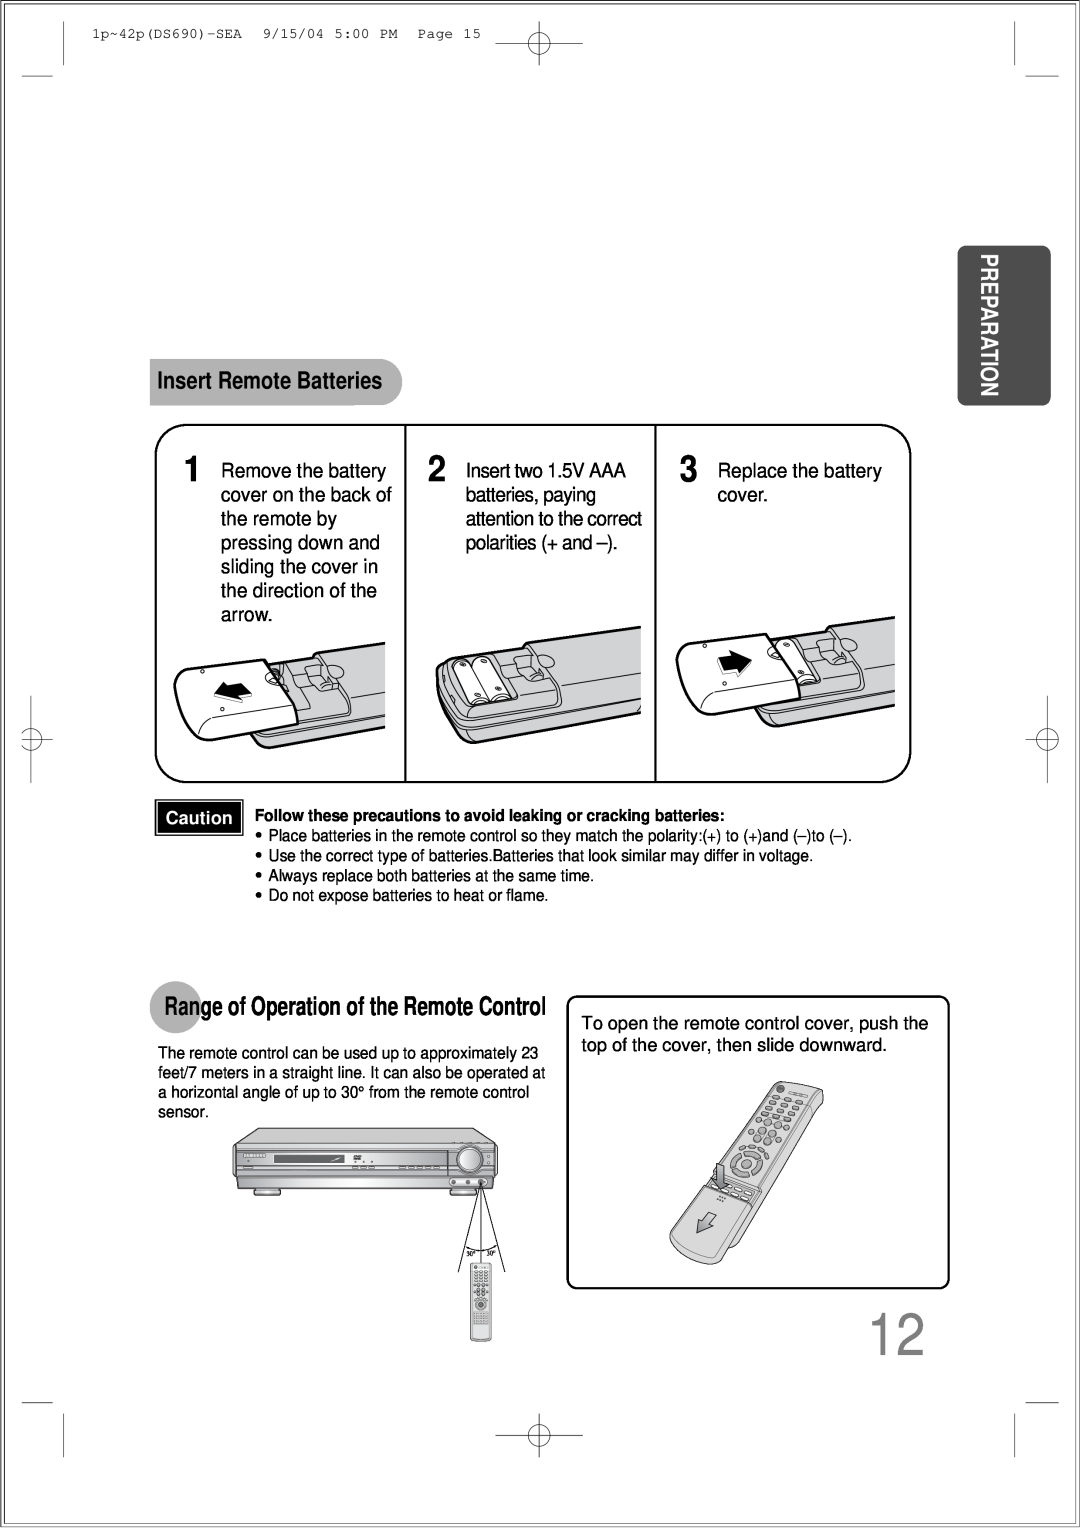 Samsung HT-DS690 instruction manual Insert Remote Batteries, Preparation, Range of Operation of the Remote Control 